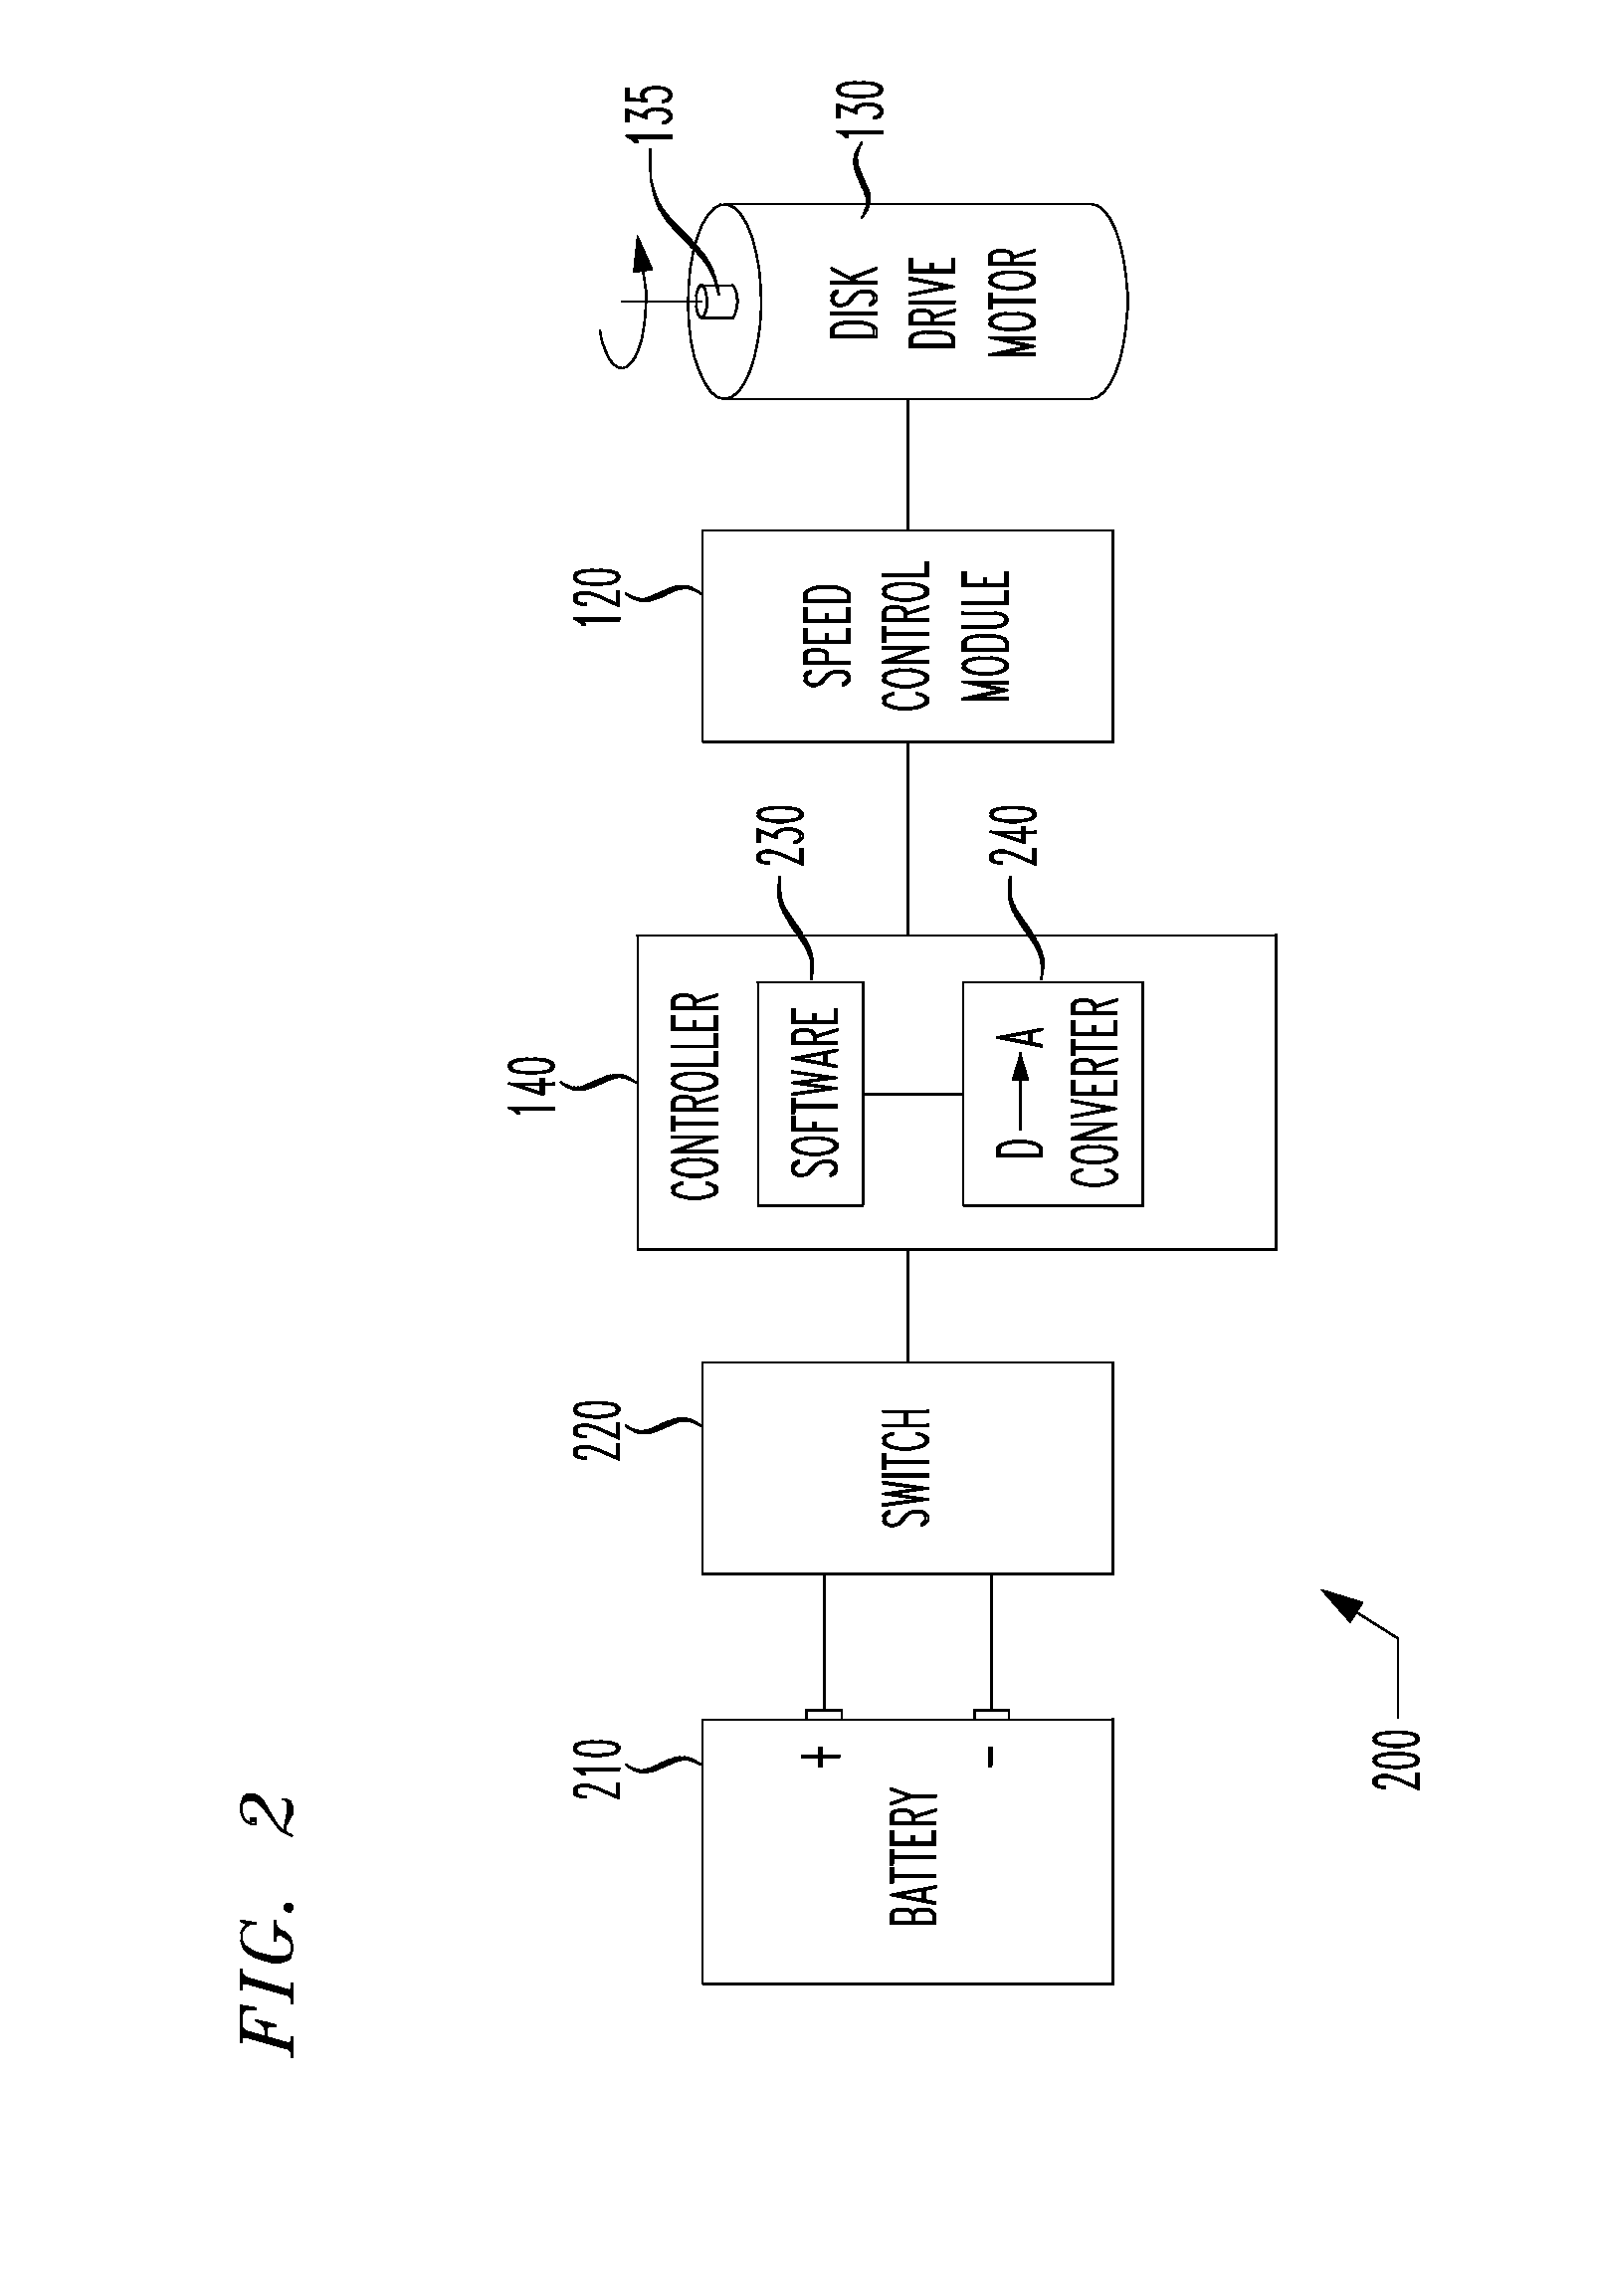 A device and method for reducing disk drive power consumption